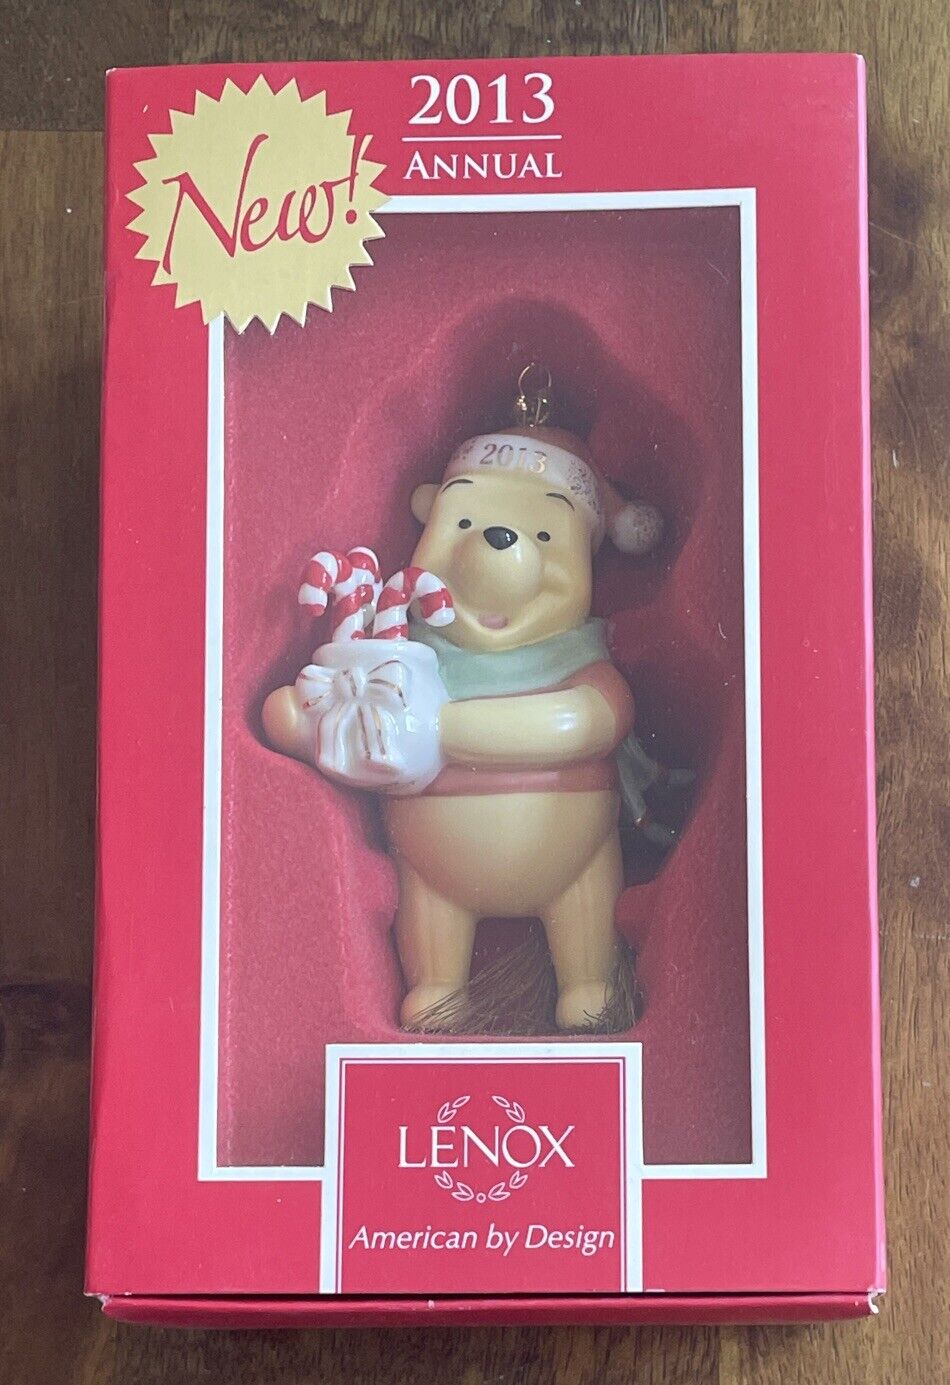 DARLING LENOX ANNUAL 2013 PEPPERMINTS FROM POOH DISNEY SHOWCASE ORNAMENT NEW